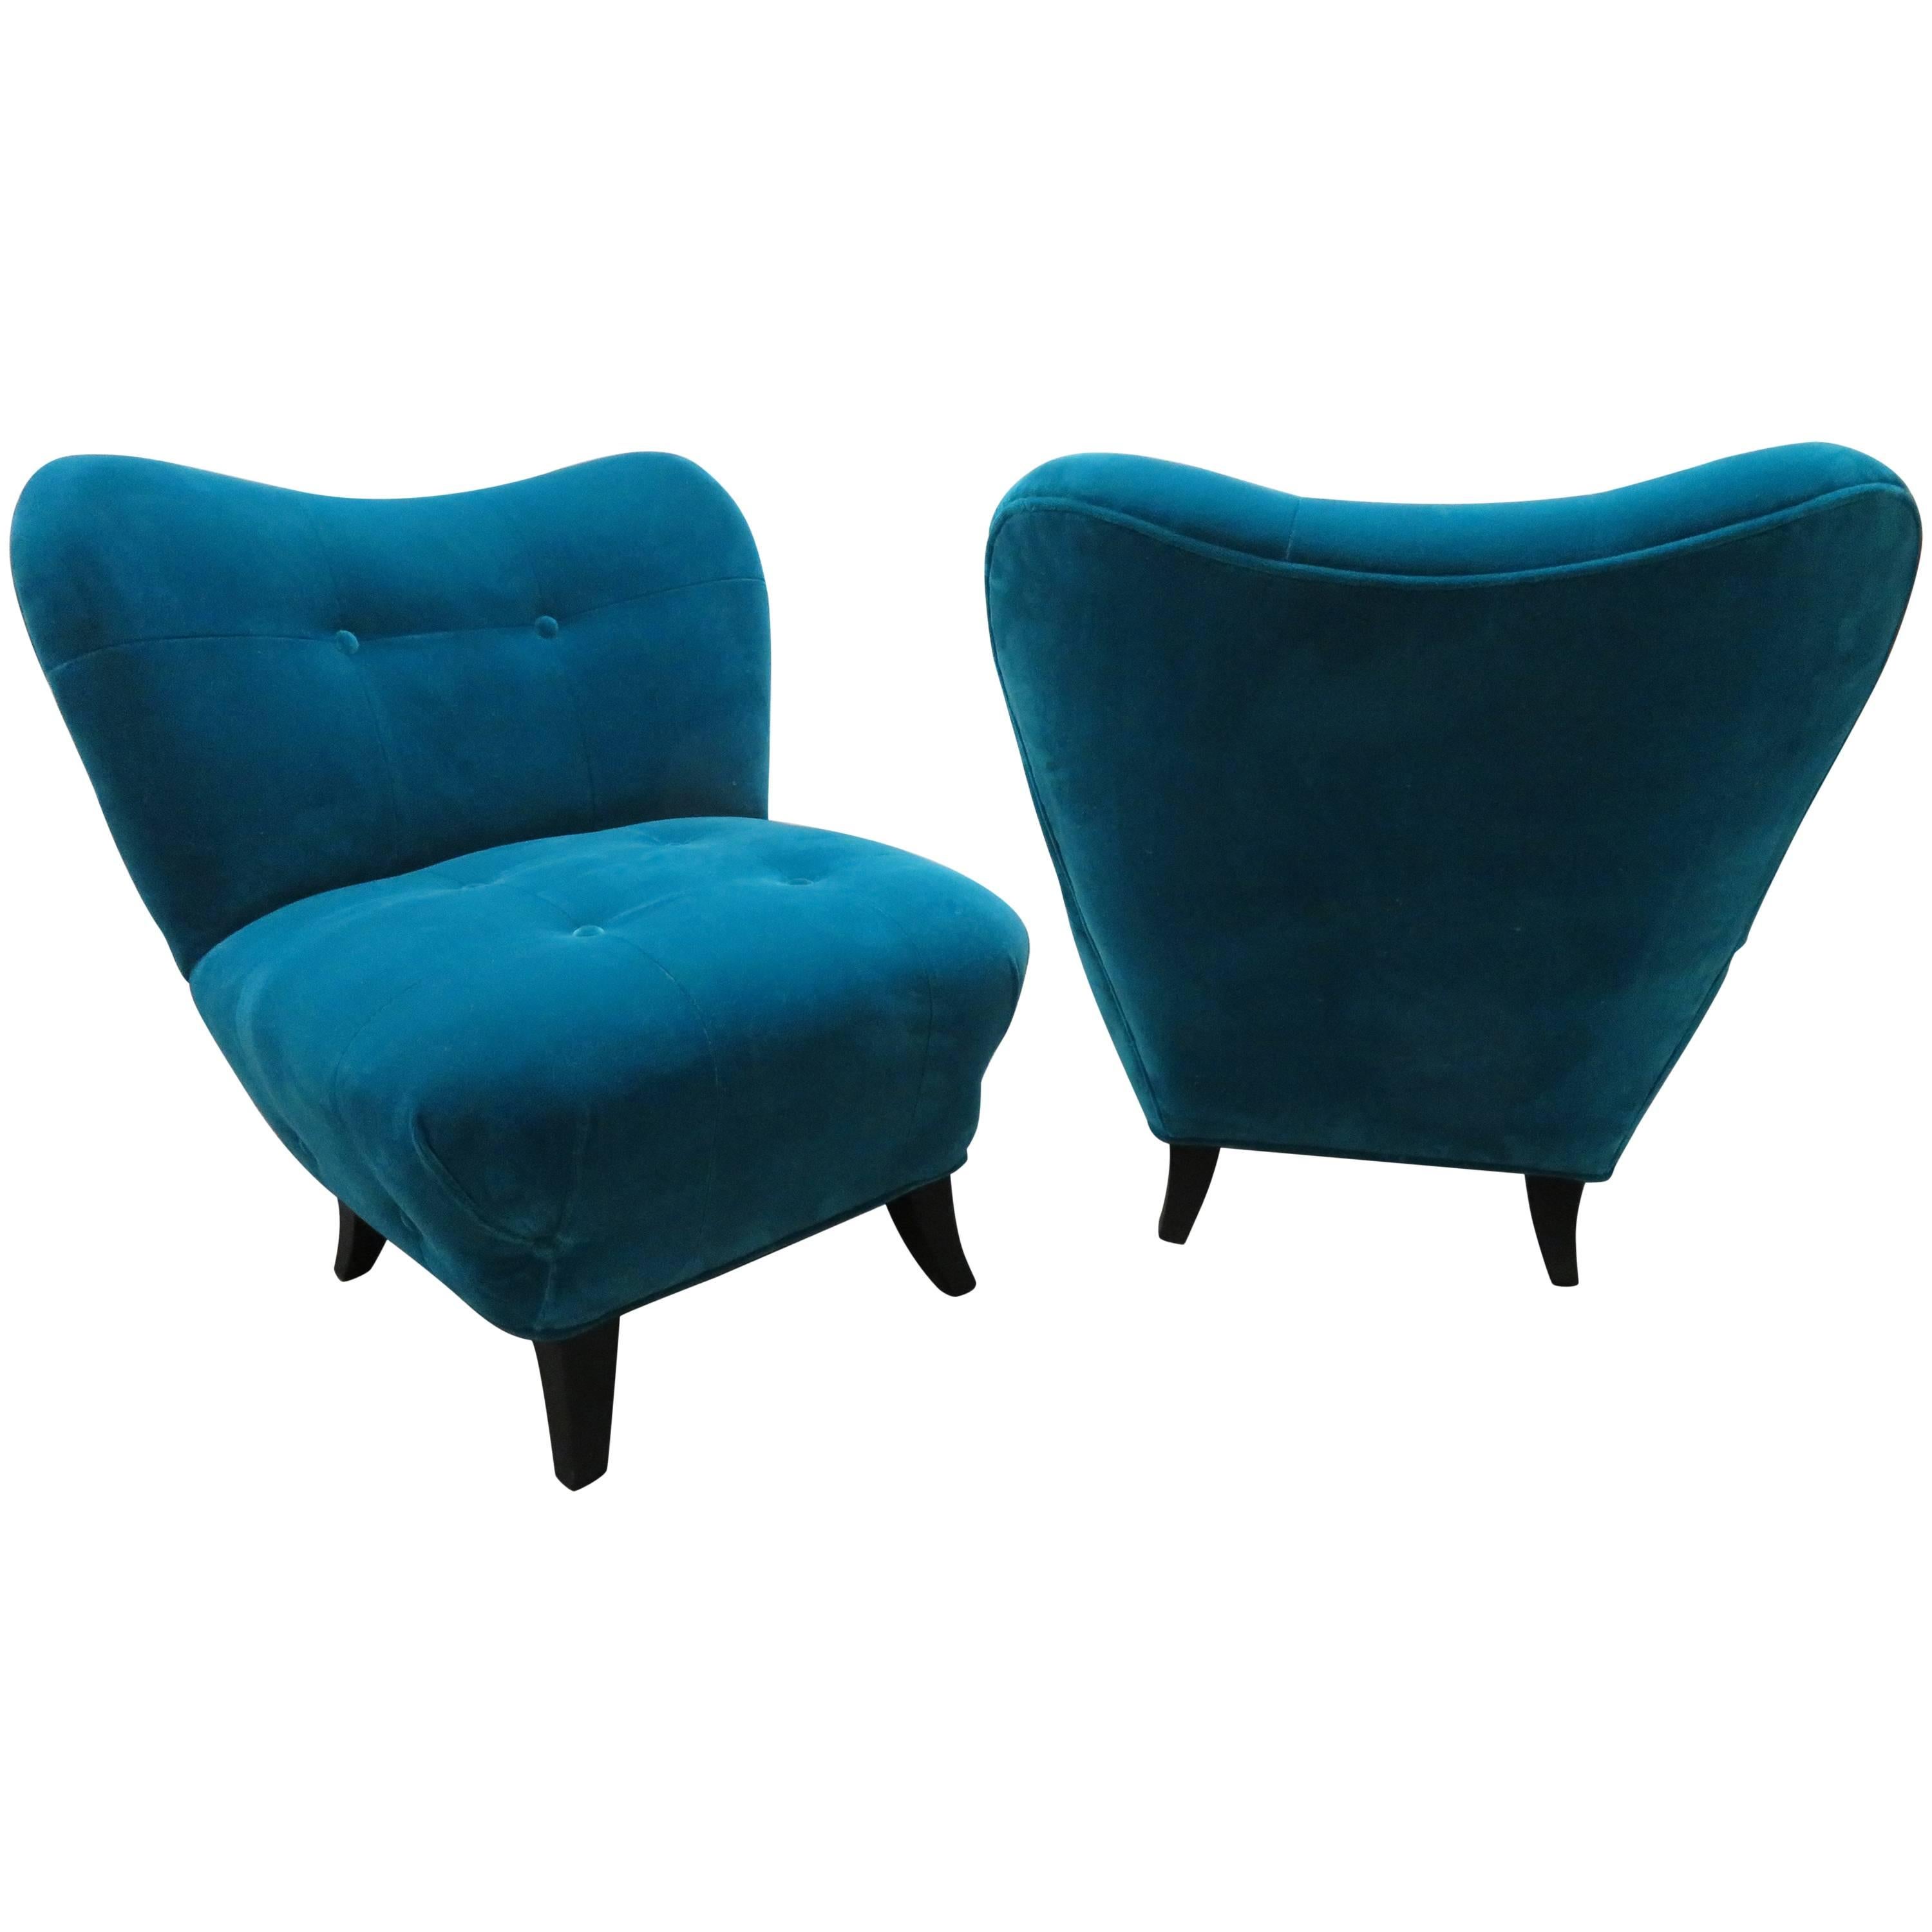 Excellent Pair of Gilbert Rohde Style Mohair Slipper Chairs, Mid-Century Modern For Sale